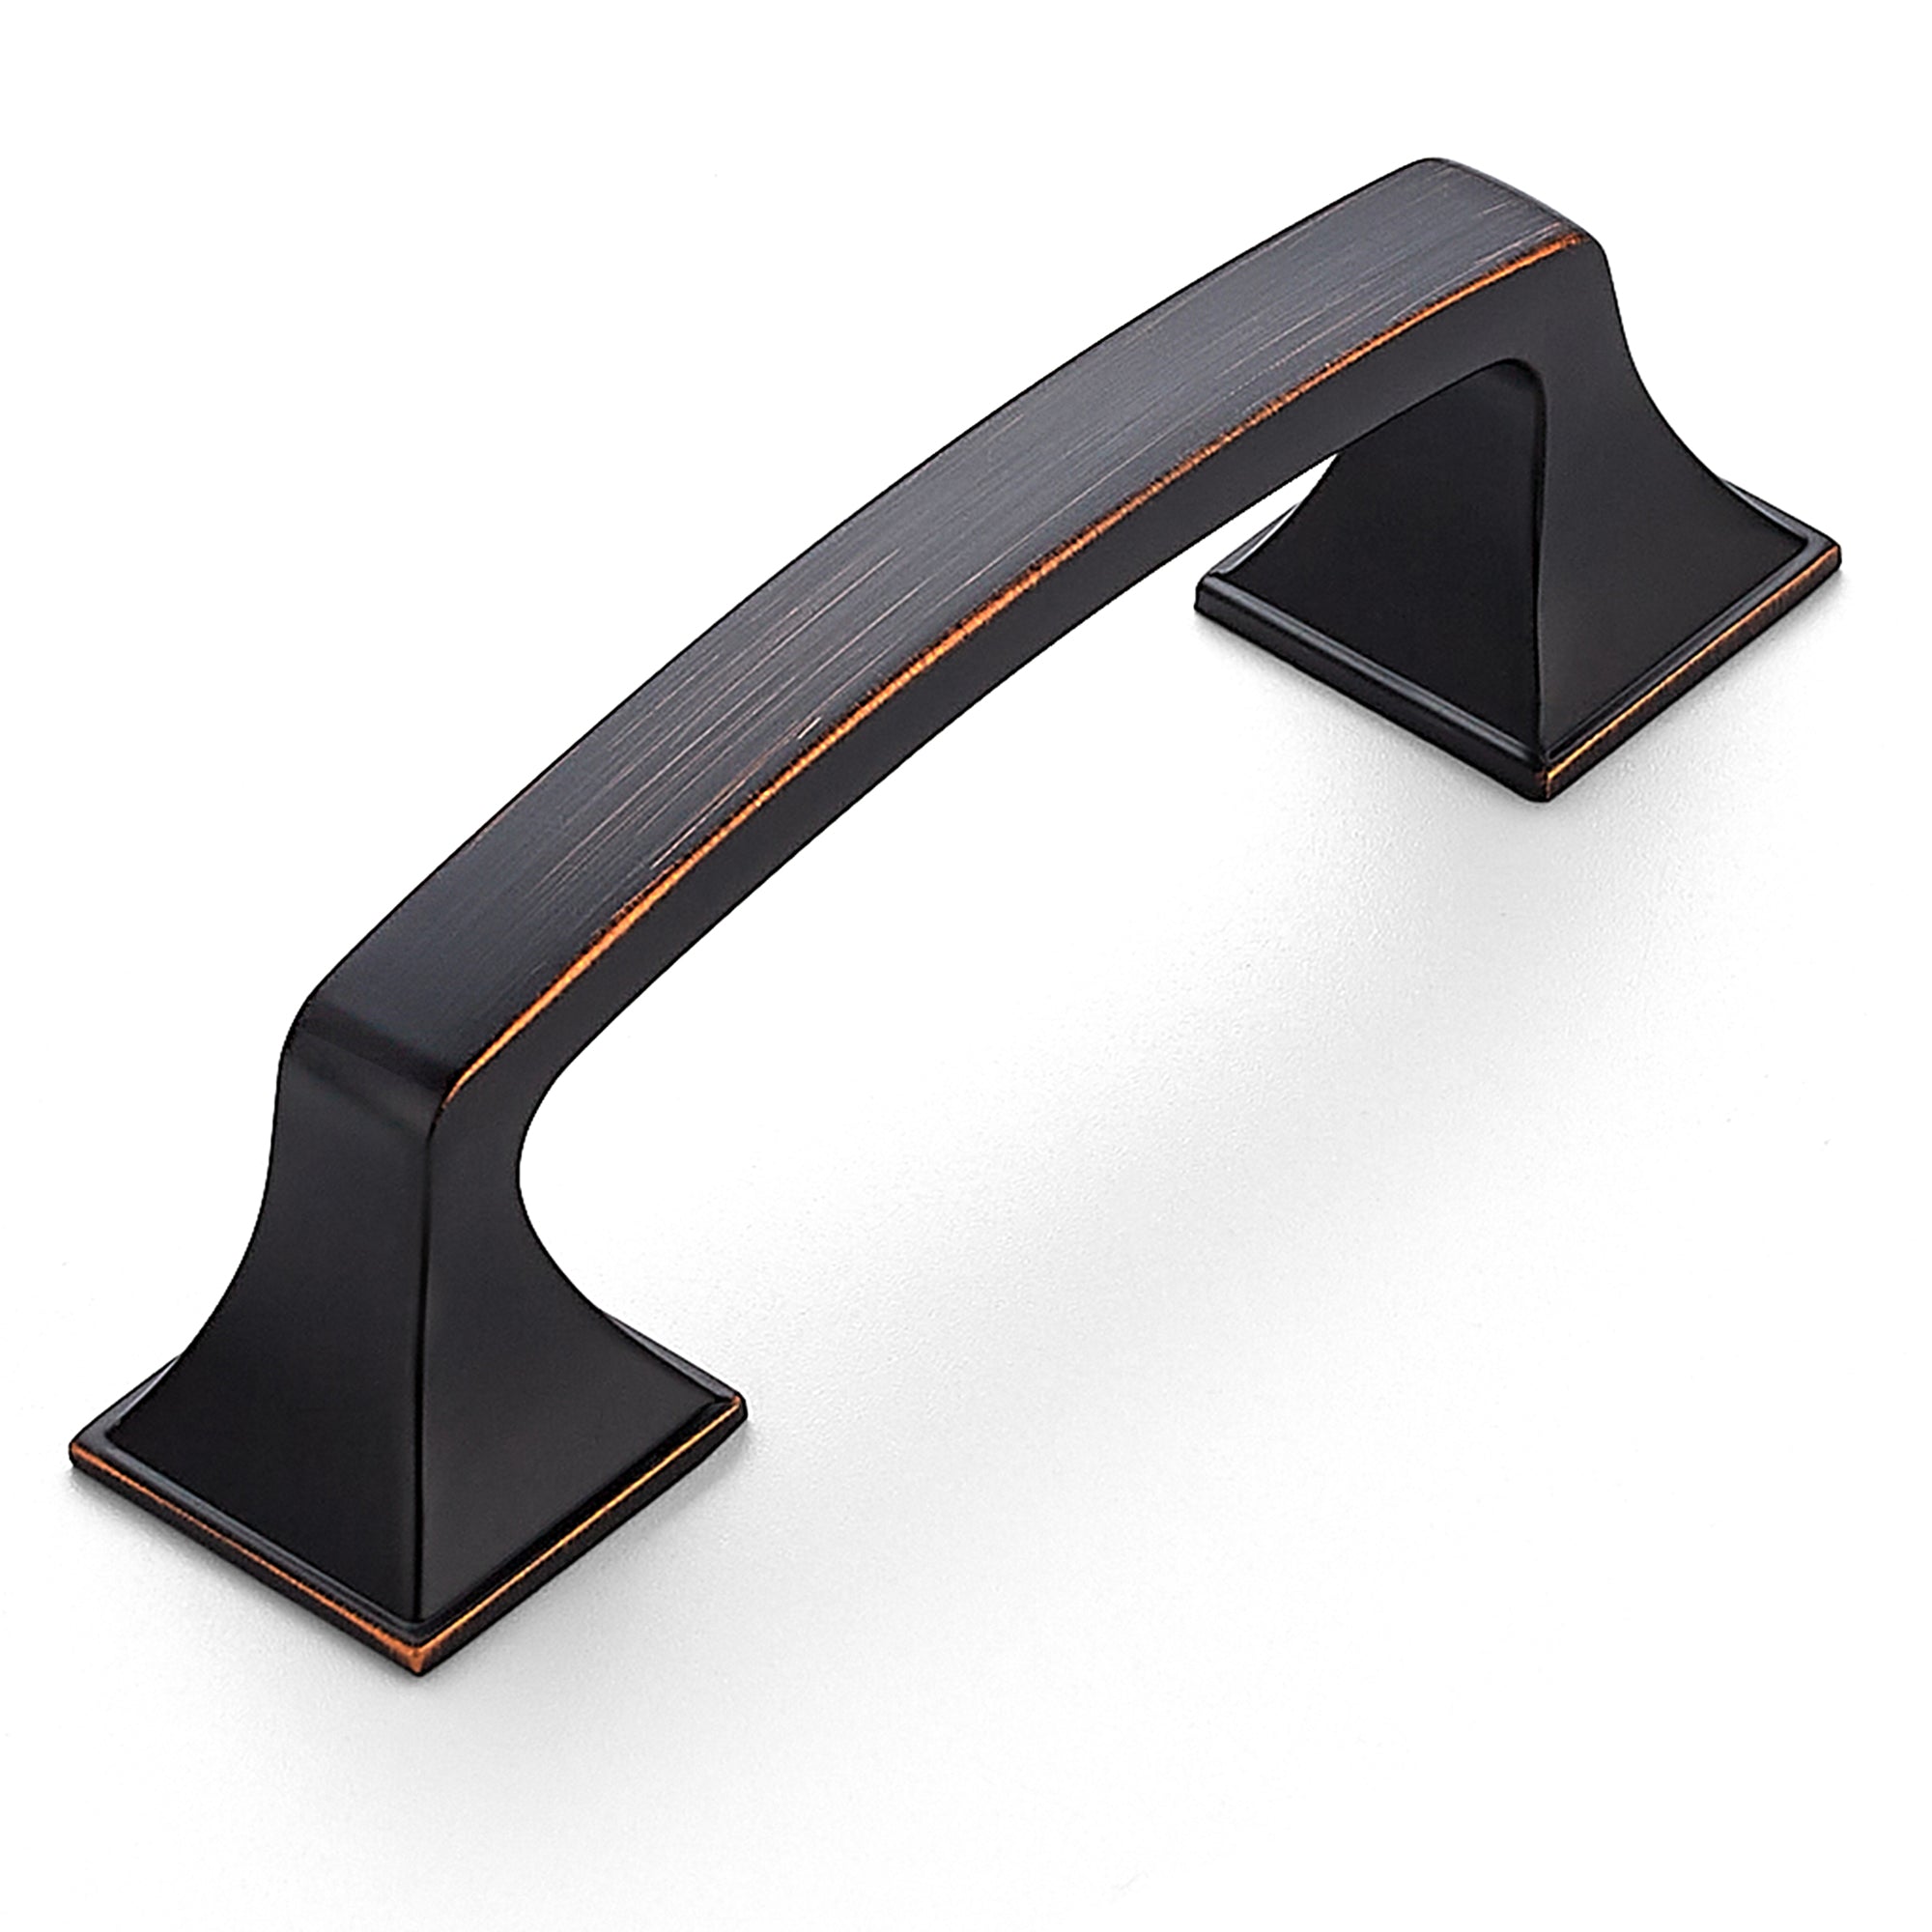 Ravinte Solid 3 Inch Big Square Foot Cabinet Pulls Oil Rubbed Bronze A